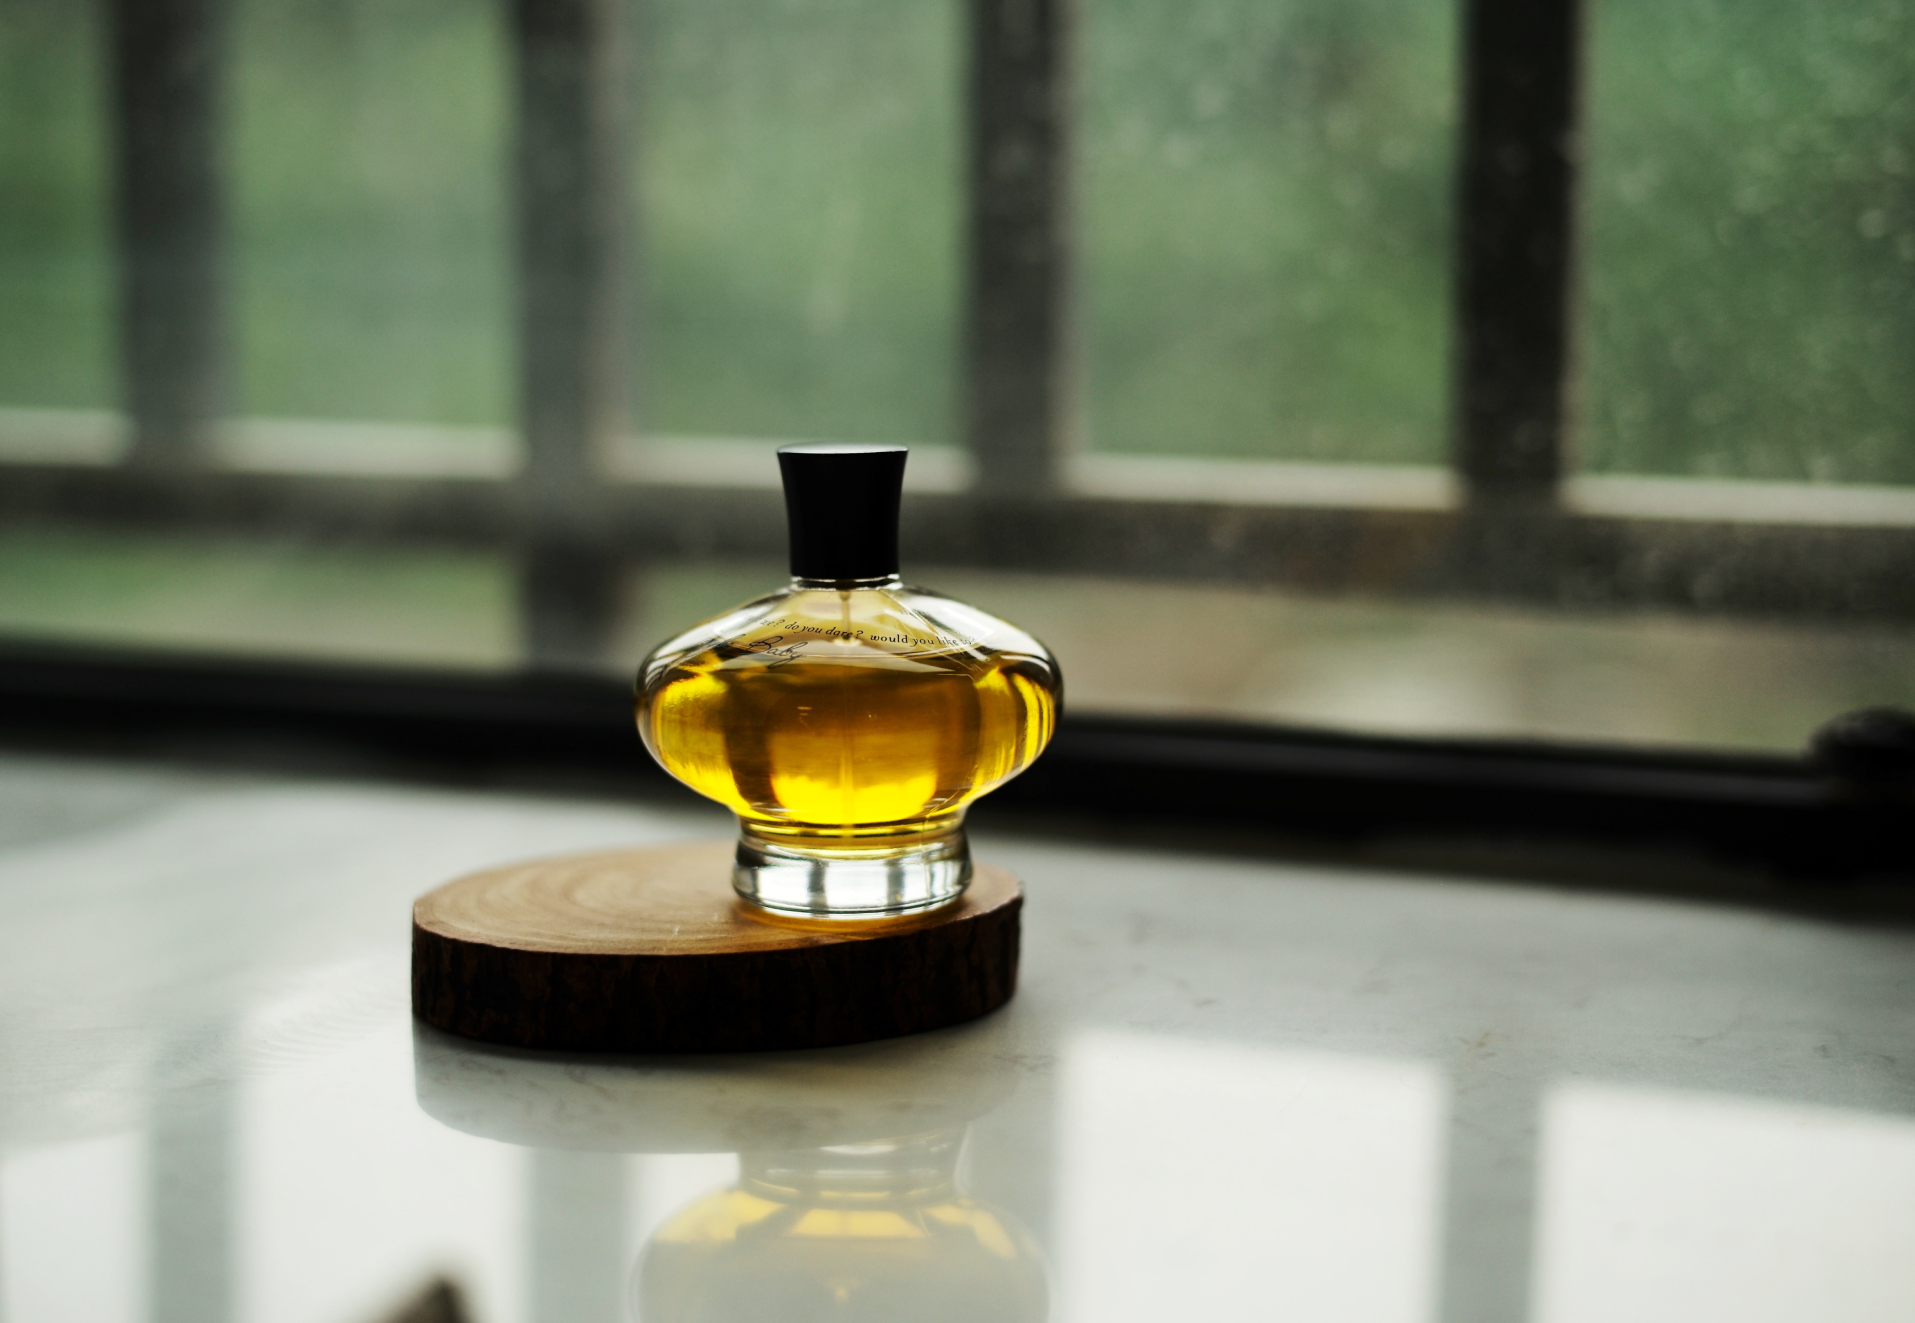 11 Most Expensive Perfumes - Best-Smelling Luxury Fragrances